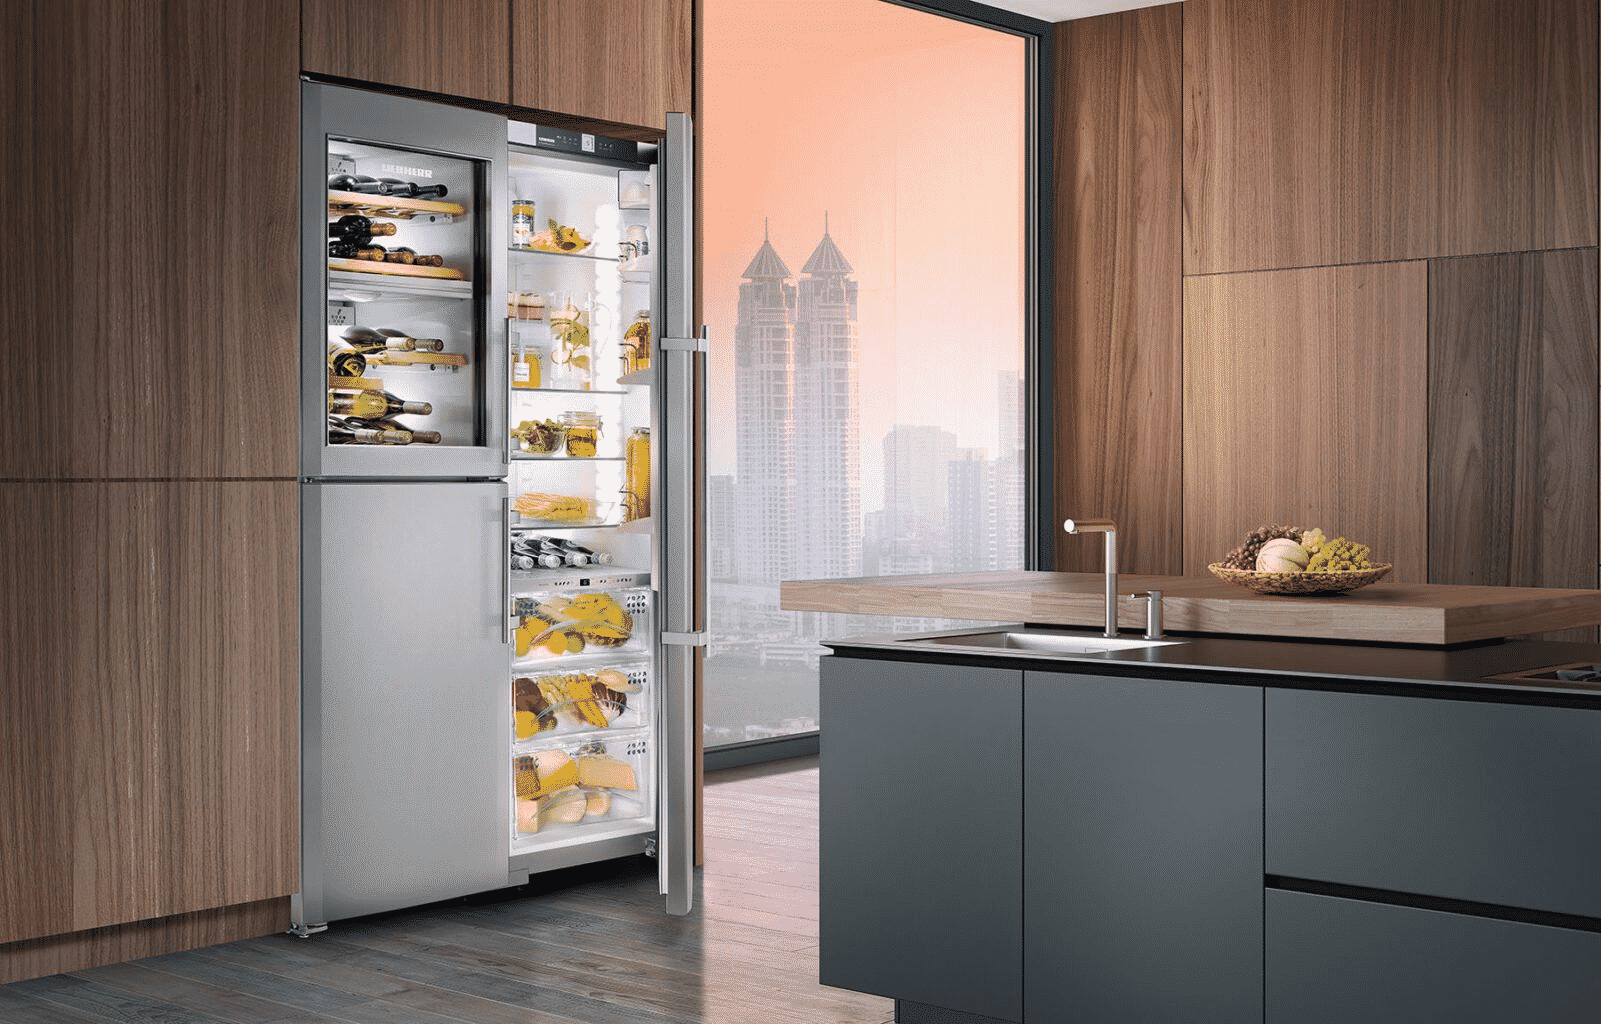 Liebherr Refrigeration Is Synonymous With Quality